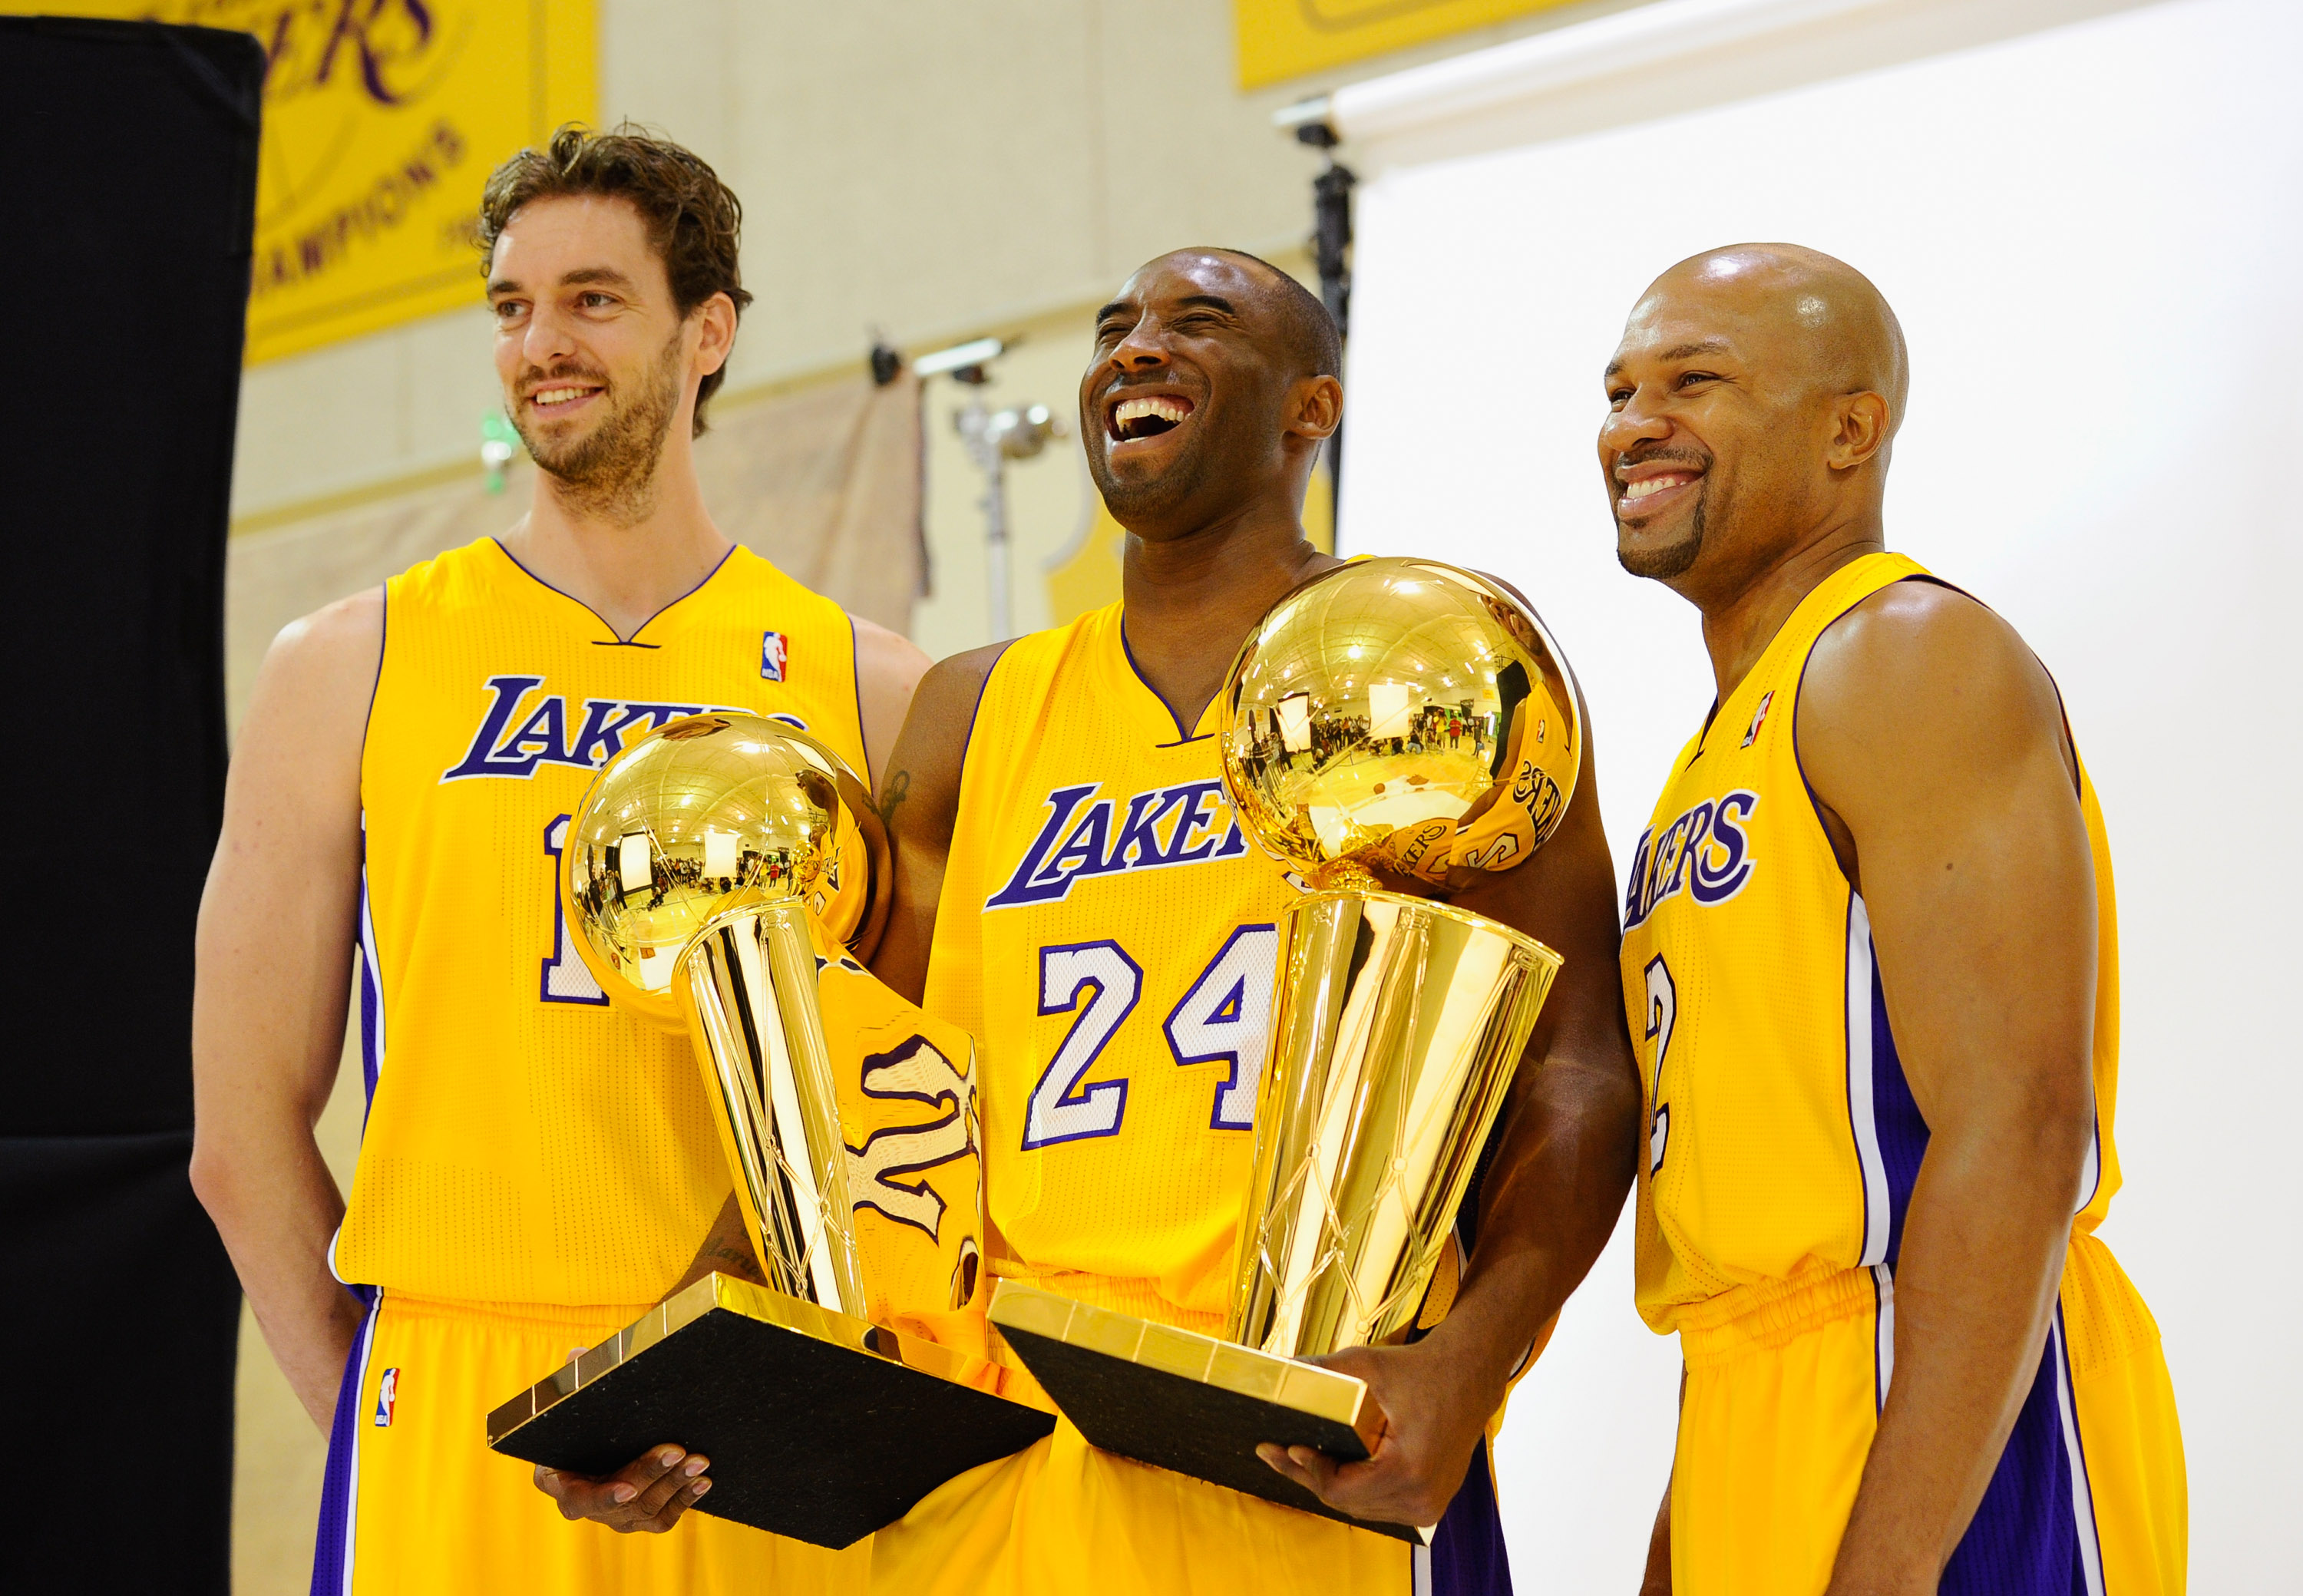 EL SEGUNDO, CA - SEPTEMBER 25:  Kobe Bryant #24  of the Los Angeles Lakers laughs as he holds two NBA Finals Larry O'Brien Championship Trophy's as he poses for a photograph with teammates Pau Gasol #16 and Derek Fisher #2 during Media Day at the Toyota C